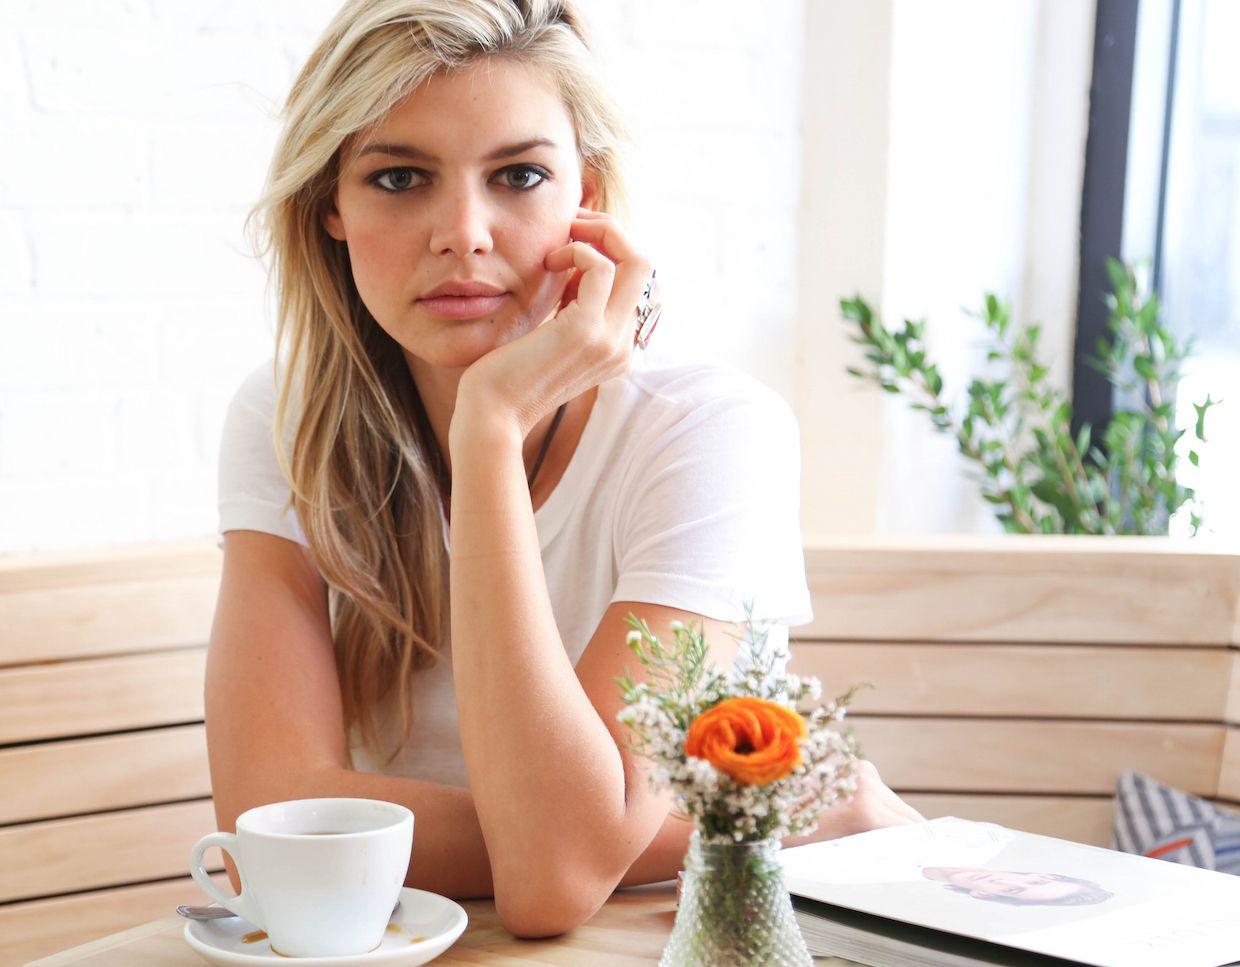 Sports Illustrated Model Kelly Rohrbach: Can't Live Without